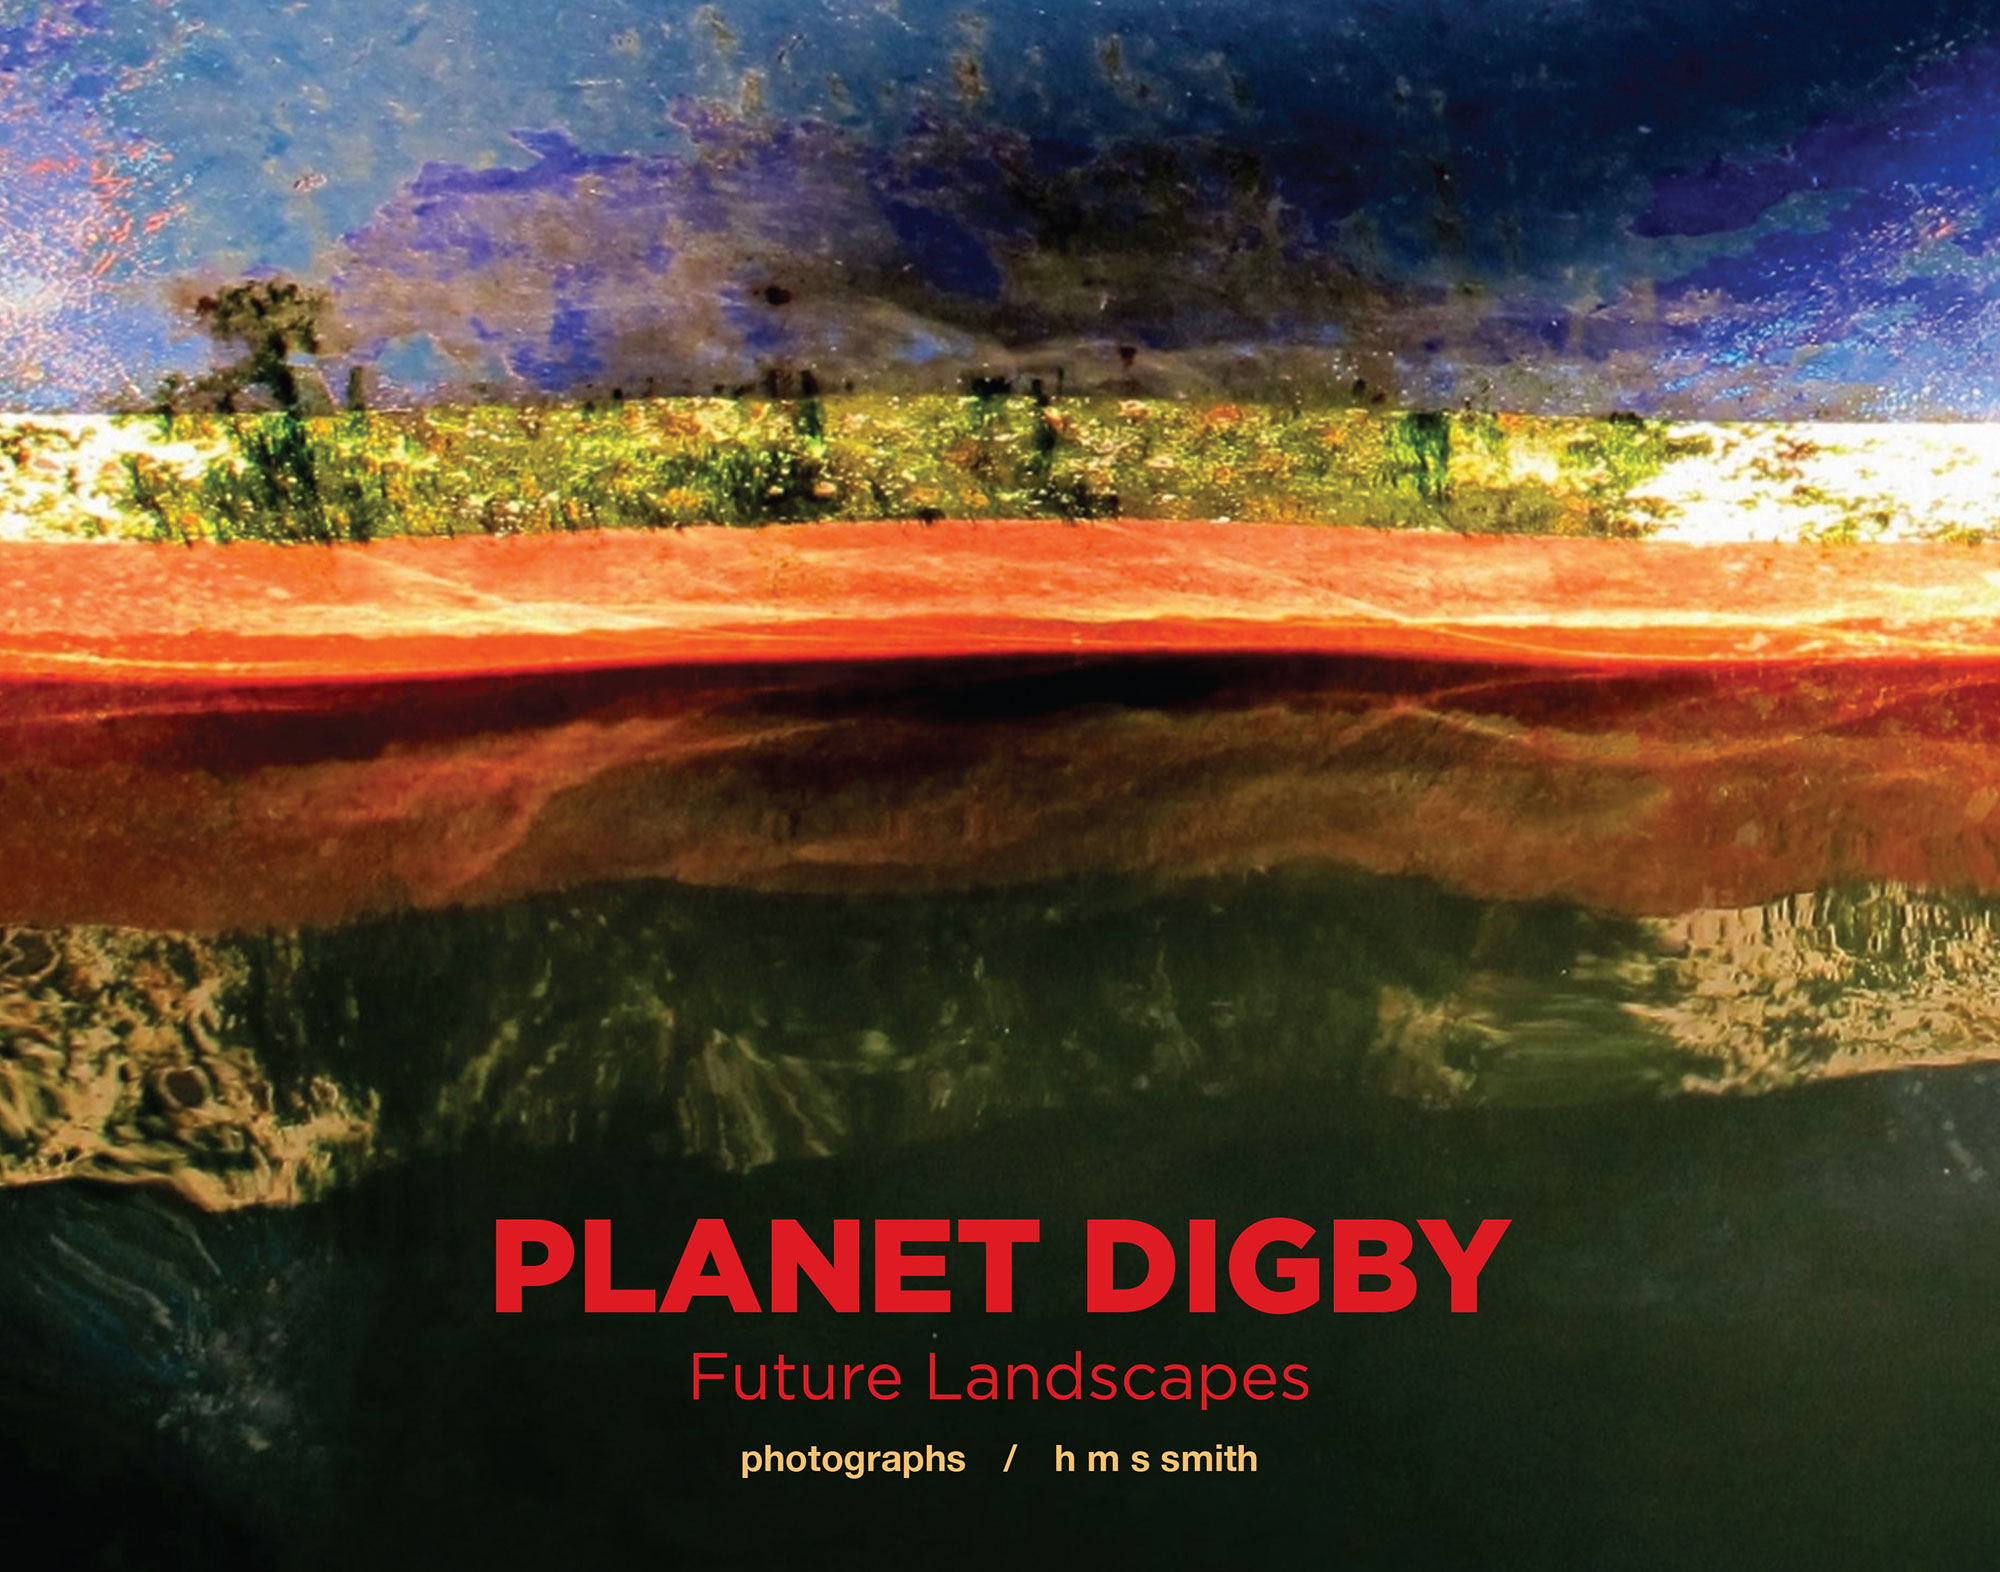 Planet Digby: Future Landscapes